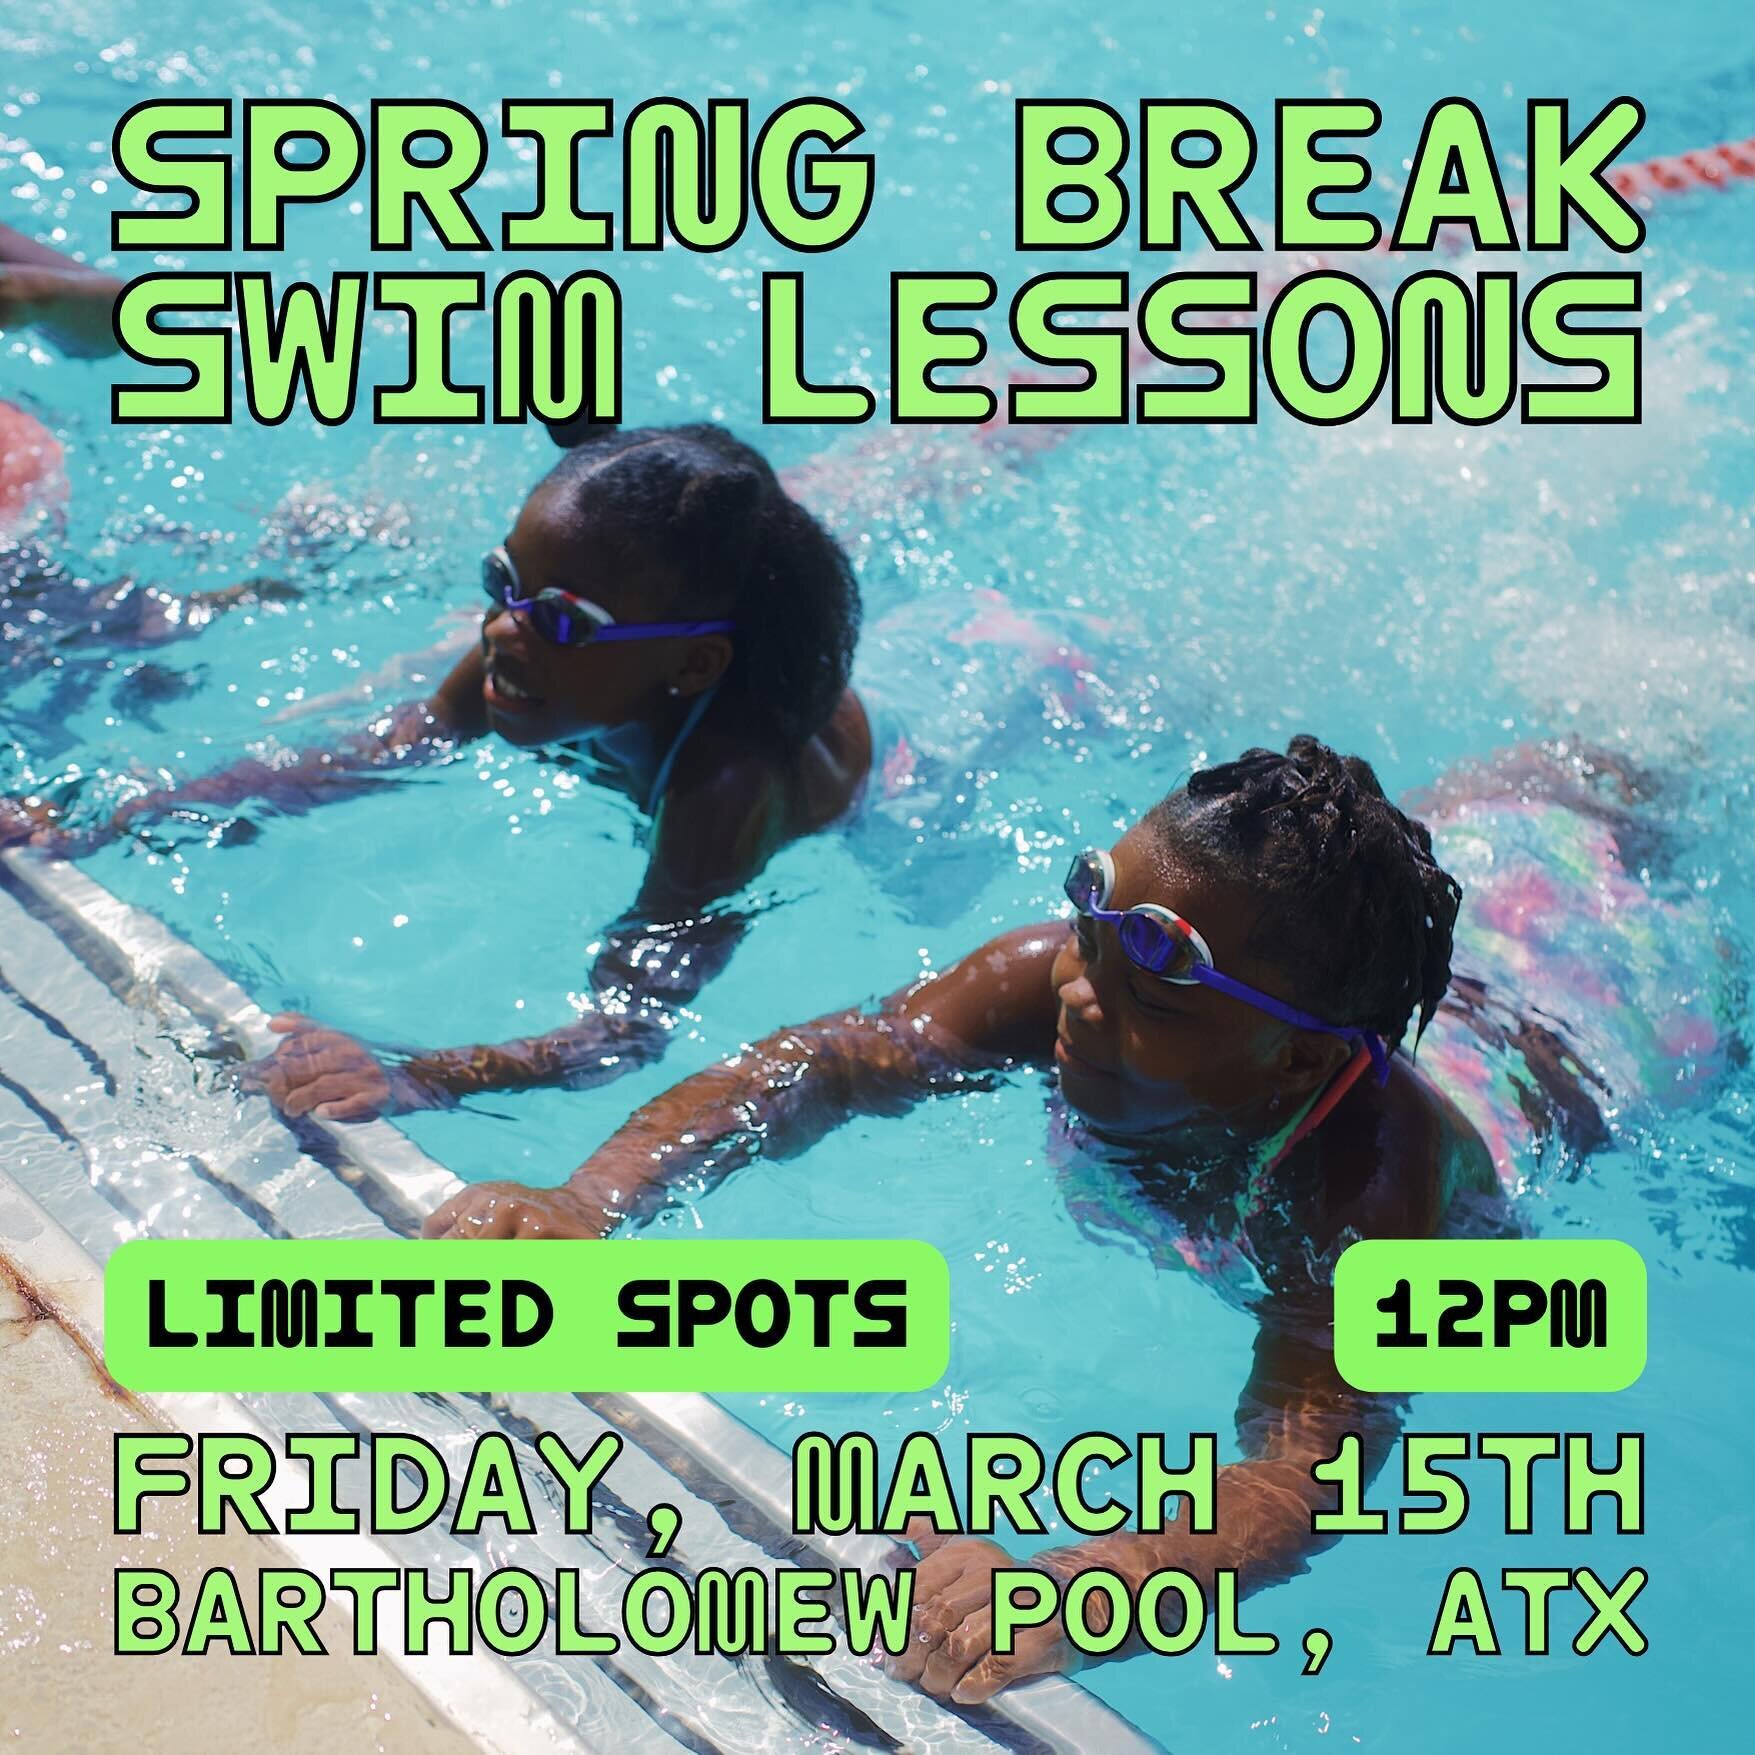 Join us this Friday at Bartholomew Pool in Austin, TX for a splashing good time at our Spring Break swim lessons! Don&rsquo;t miss out on the fun - secure your spot now by registering through the link in our bio!